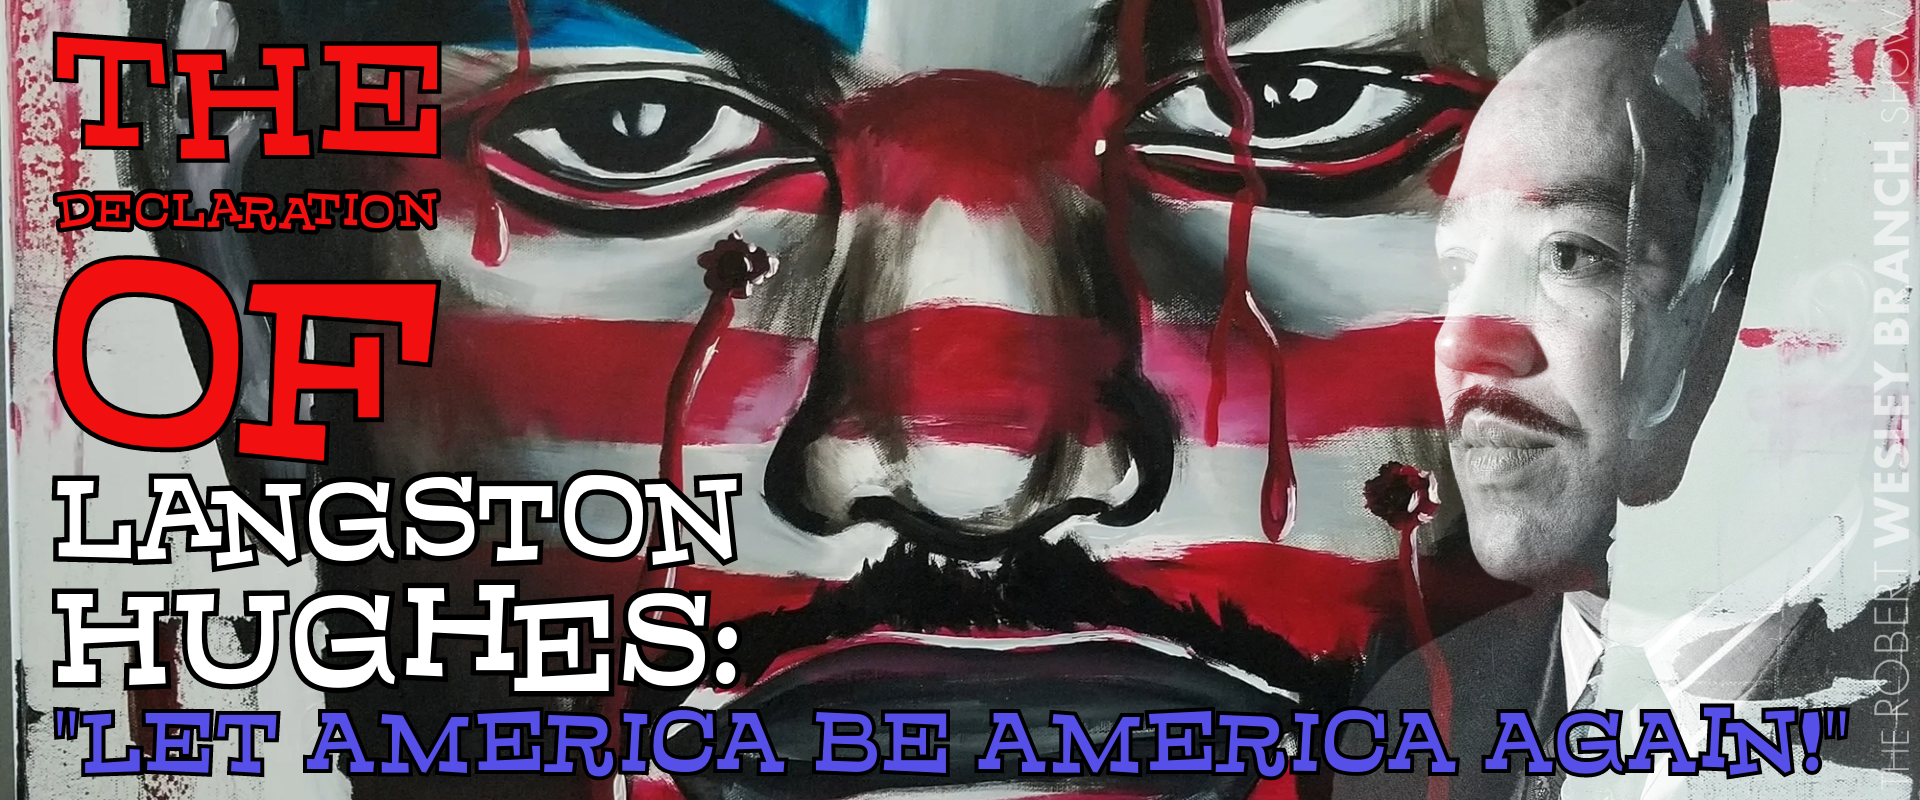 Permalink to: The Revolutionary Declaration of Langston Hughes: “Let America Be America Again!”